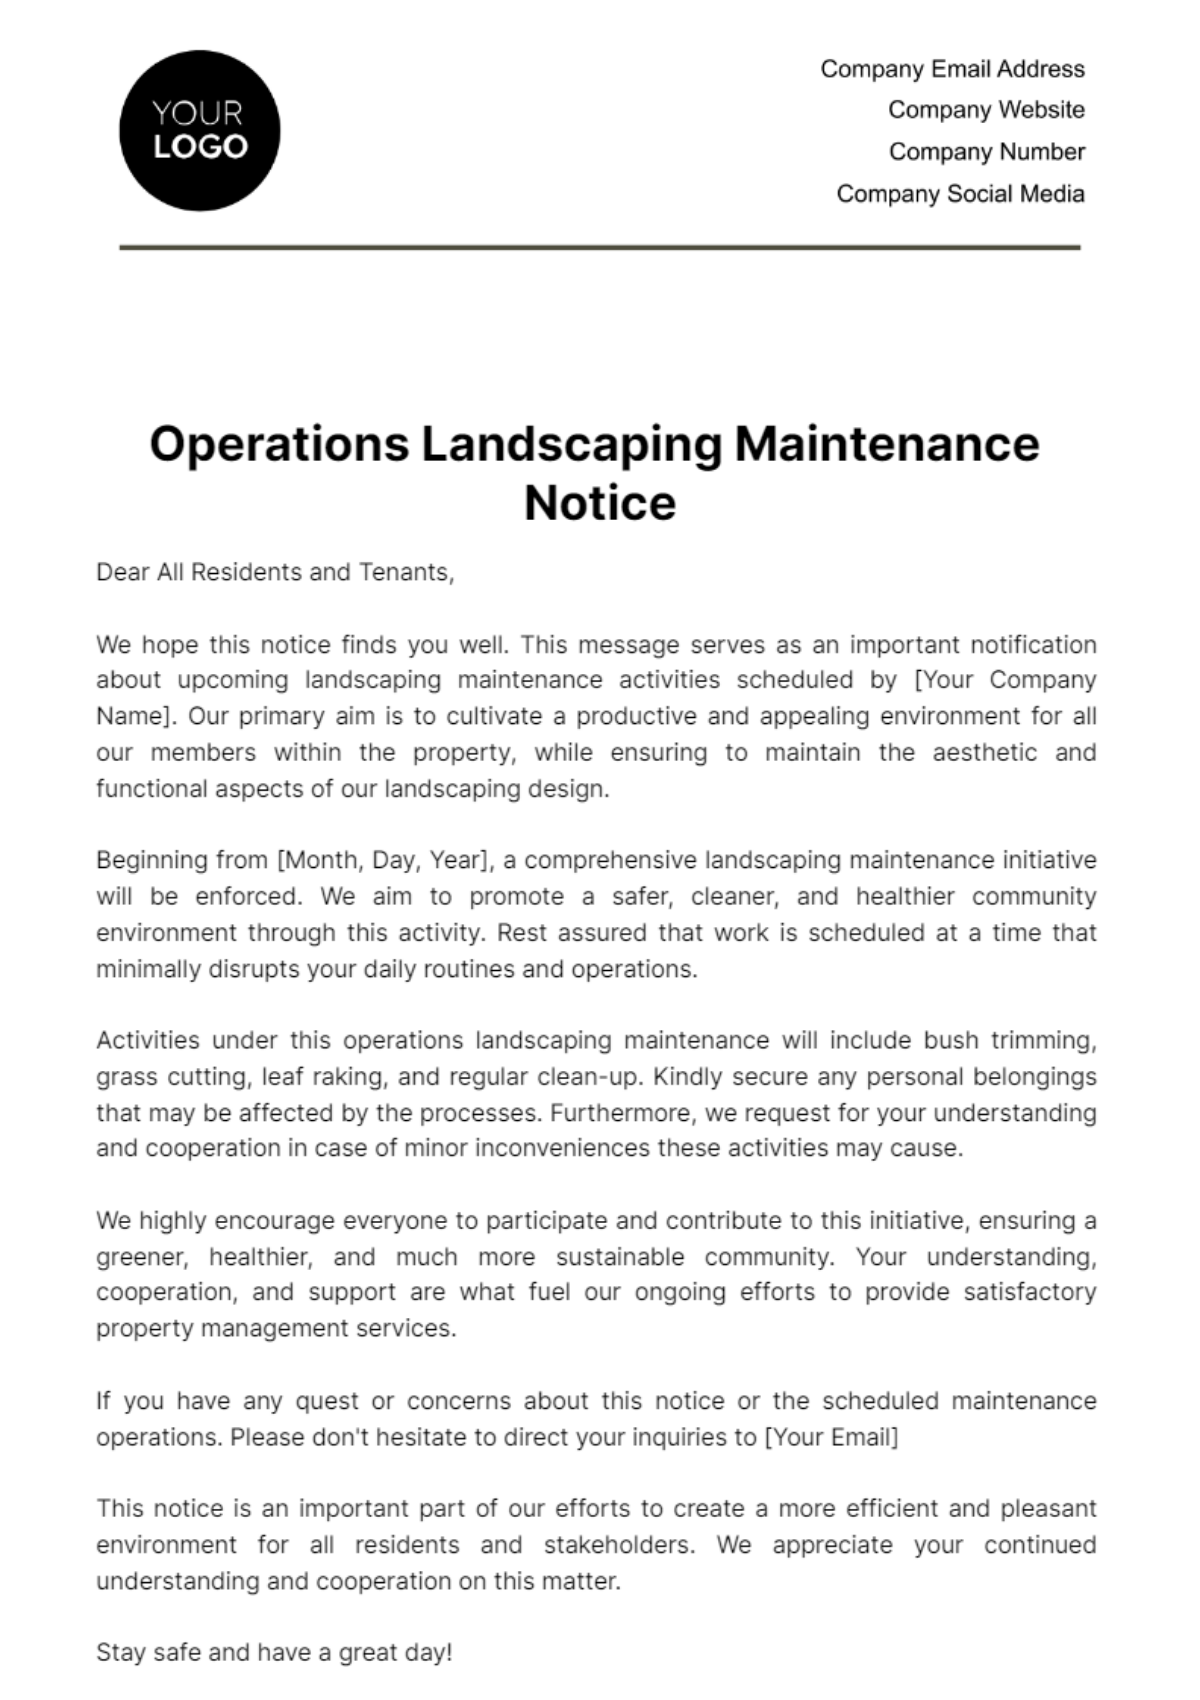 Free Operations Landscaping Maintenance Notice Template